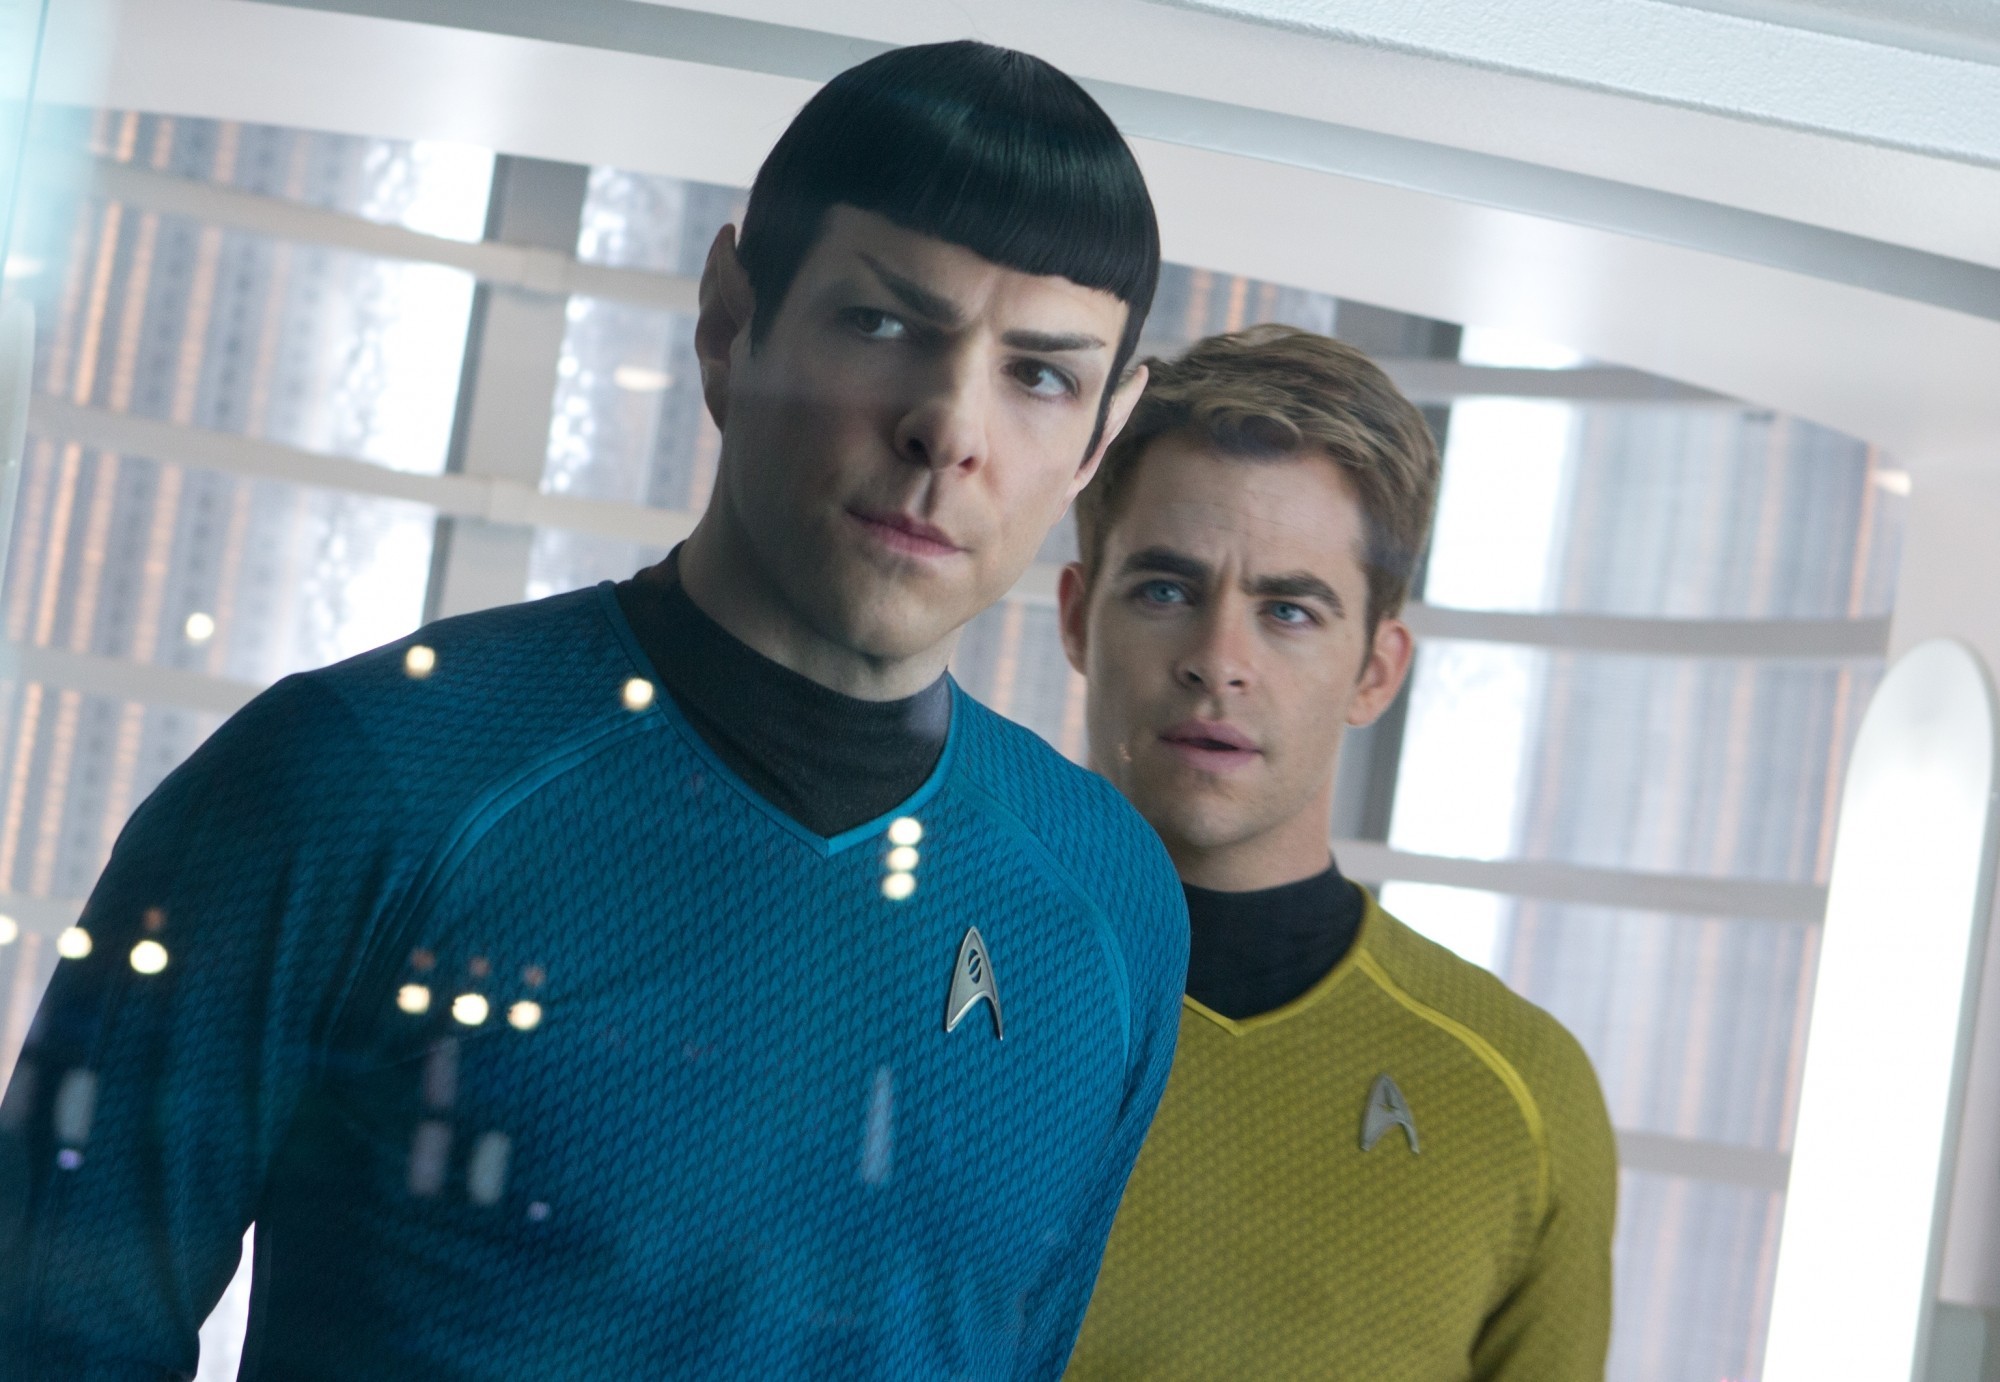 Zachary Quinto stars as Spock and Chris Pine stars as James T. Kirk in Paramount Pictures' Star Trek Into Darkness (2013)